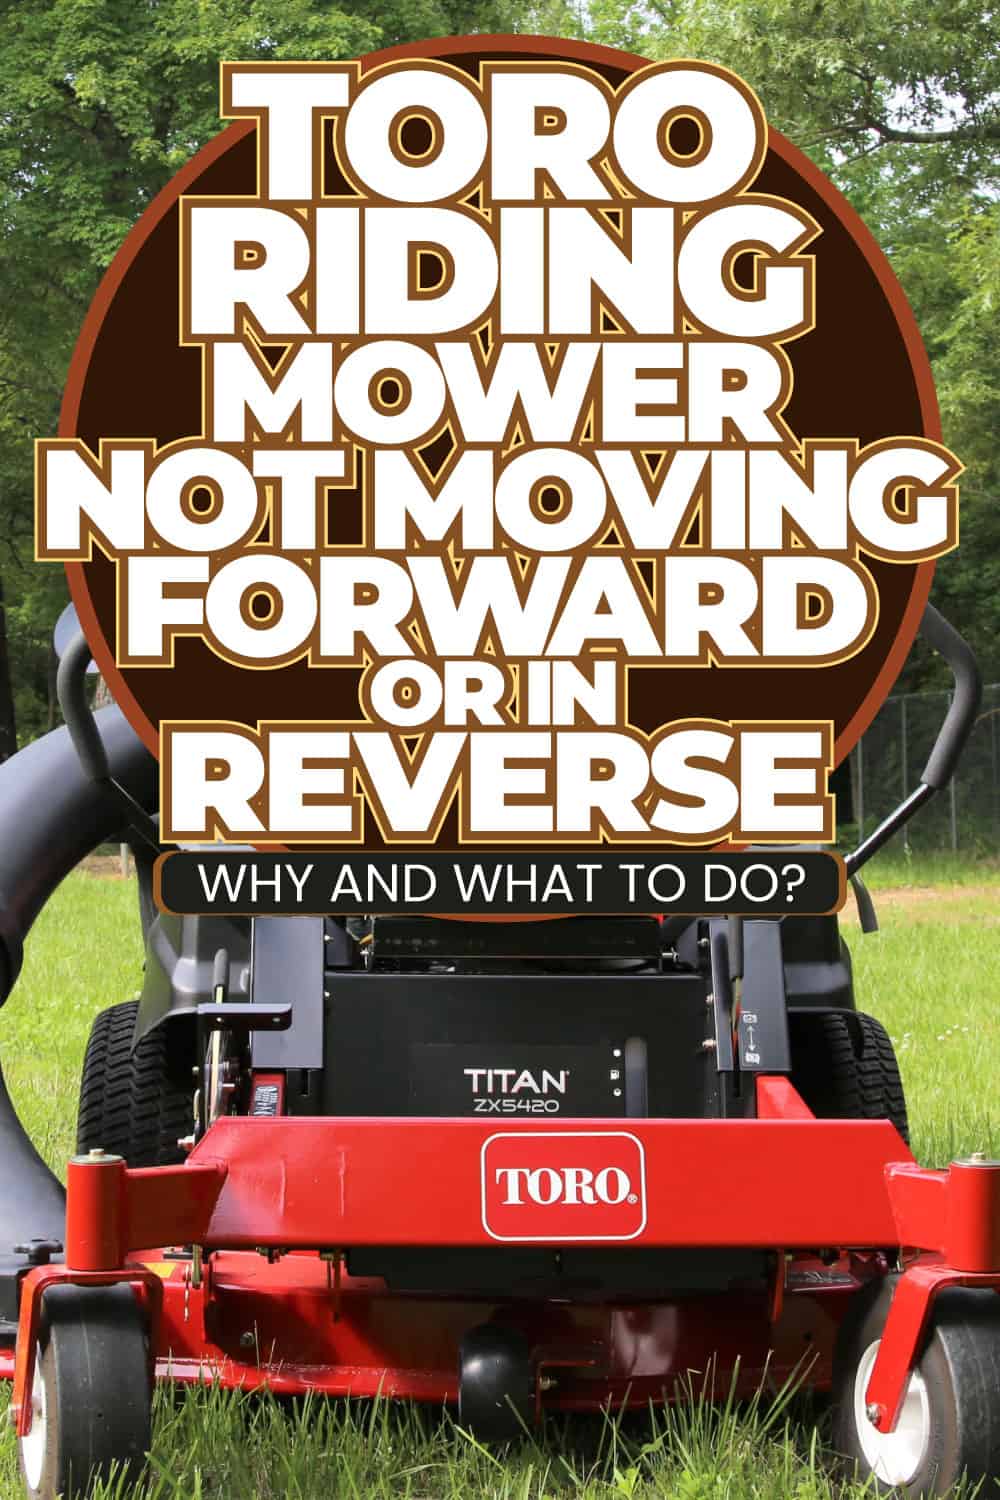 Toro Riding Mower Not Moving Forward Or In Reverse - Why And What To Do?